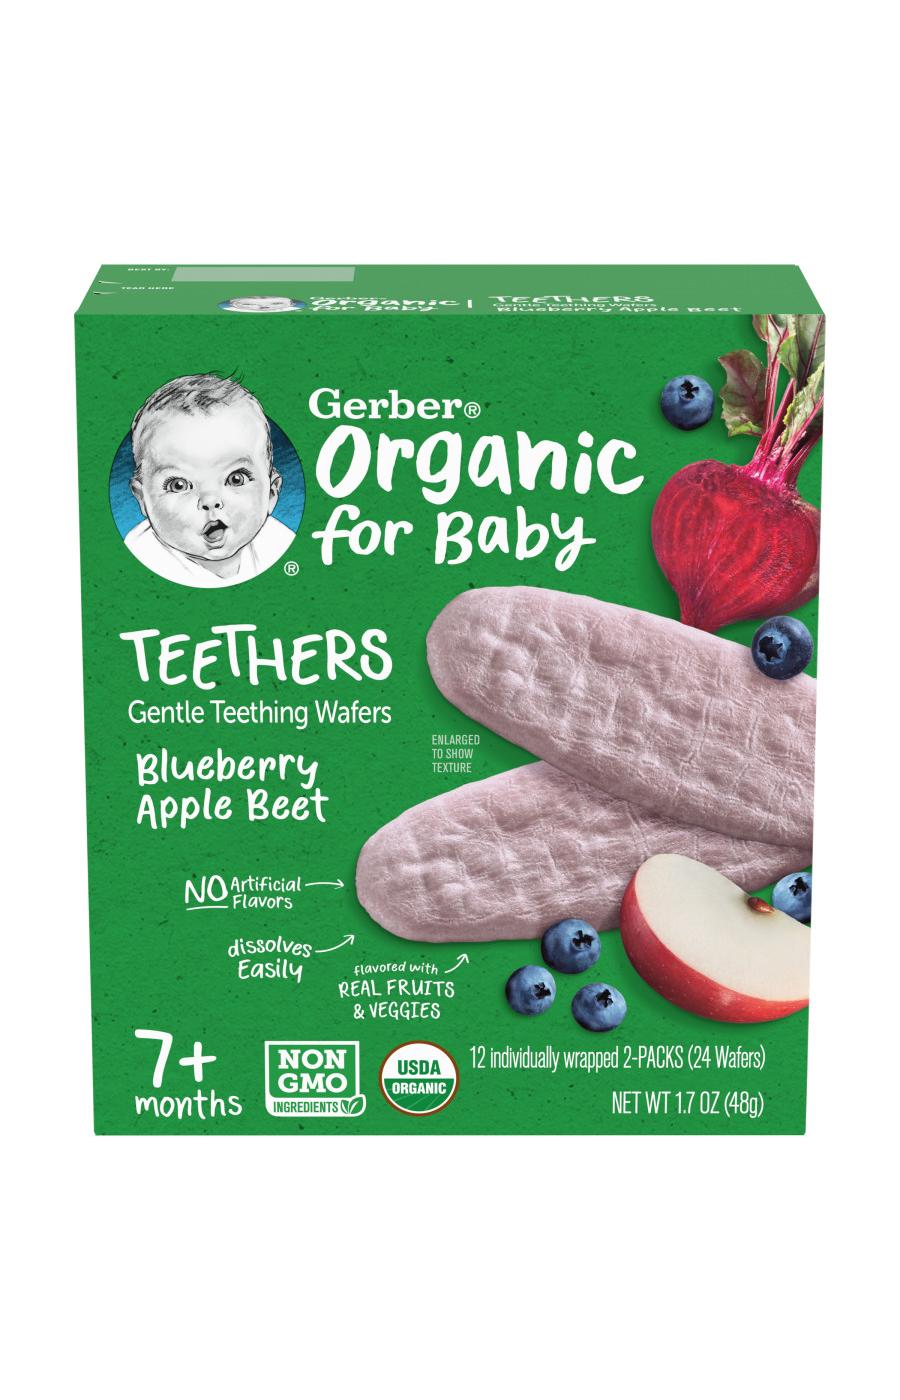 Gerber Organic for Baby Teethers - Blueberry Apple & Beet; image 1 of 5